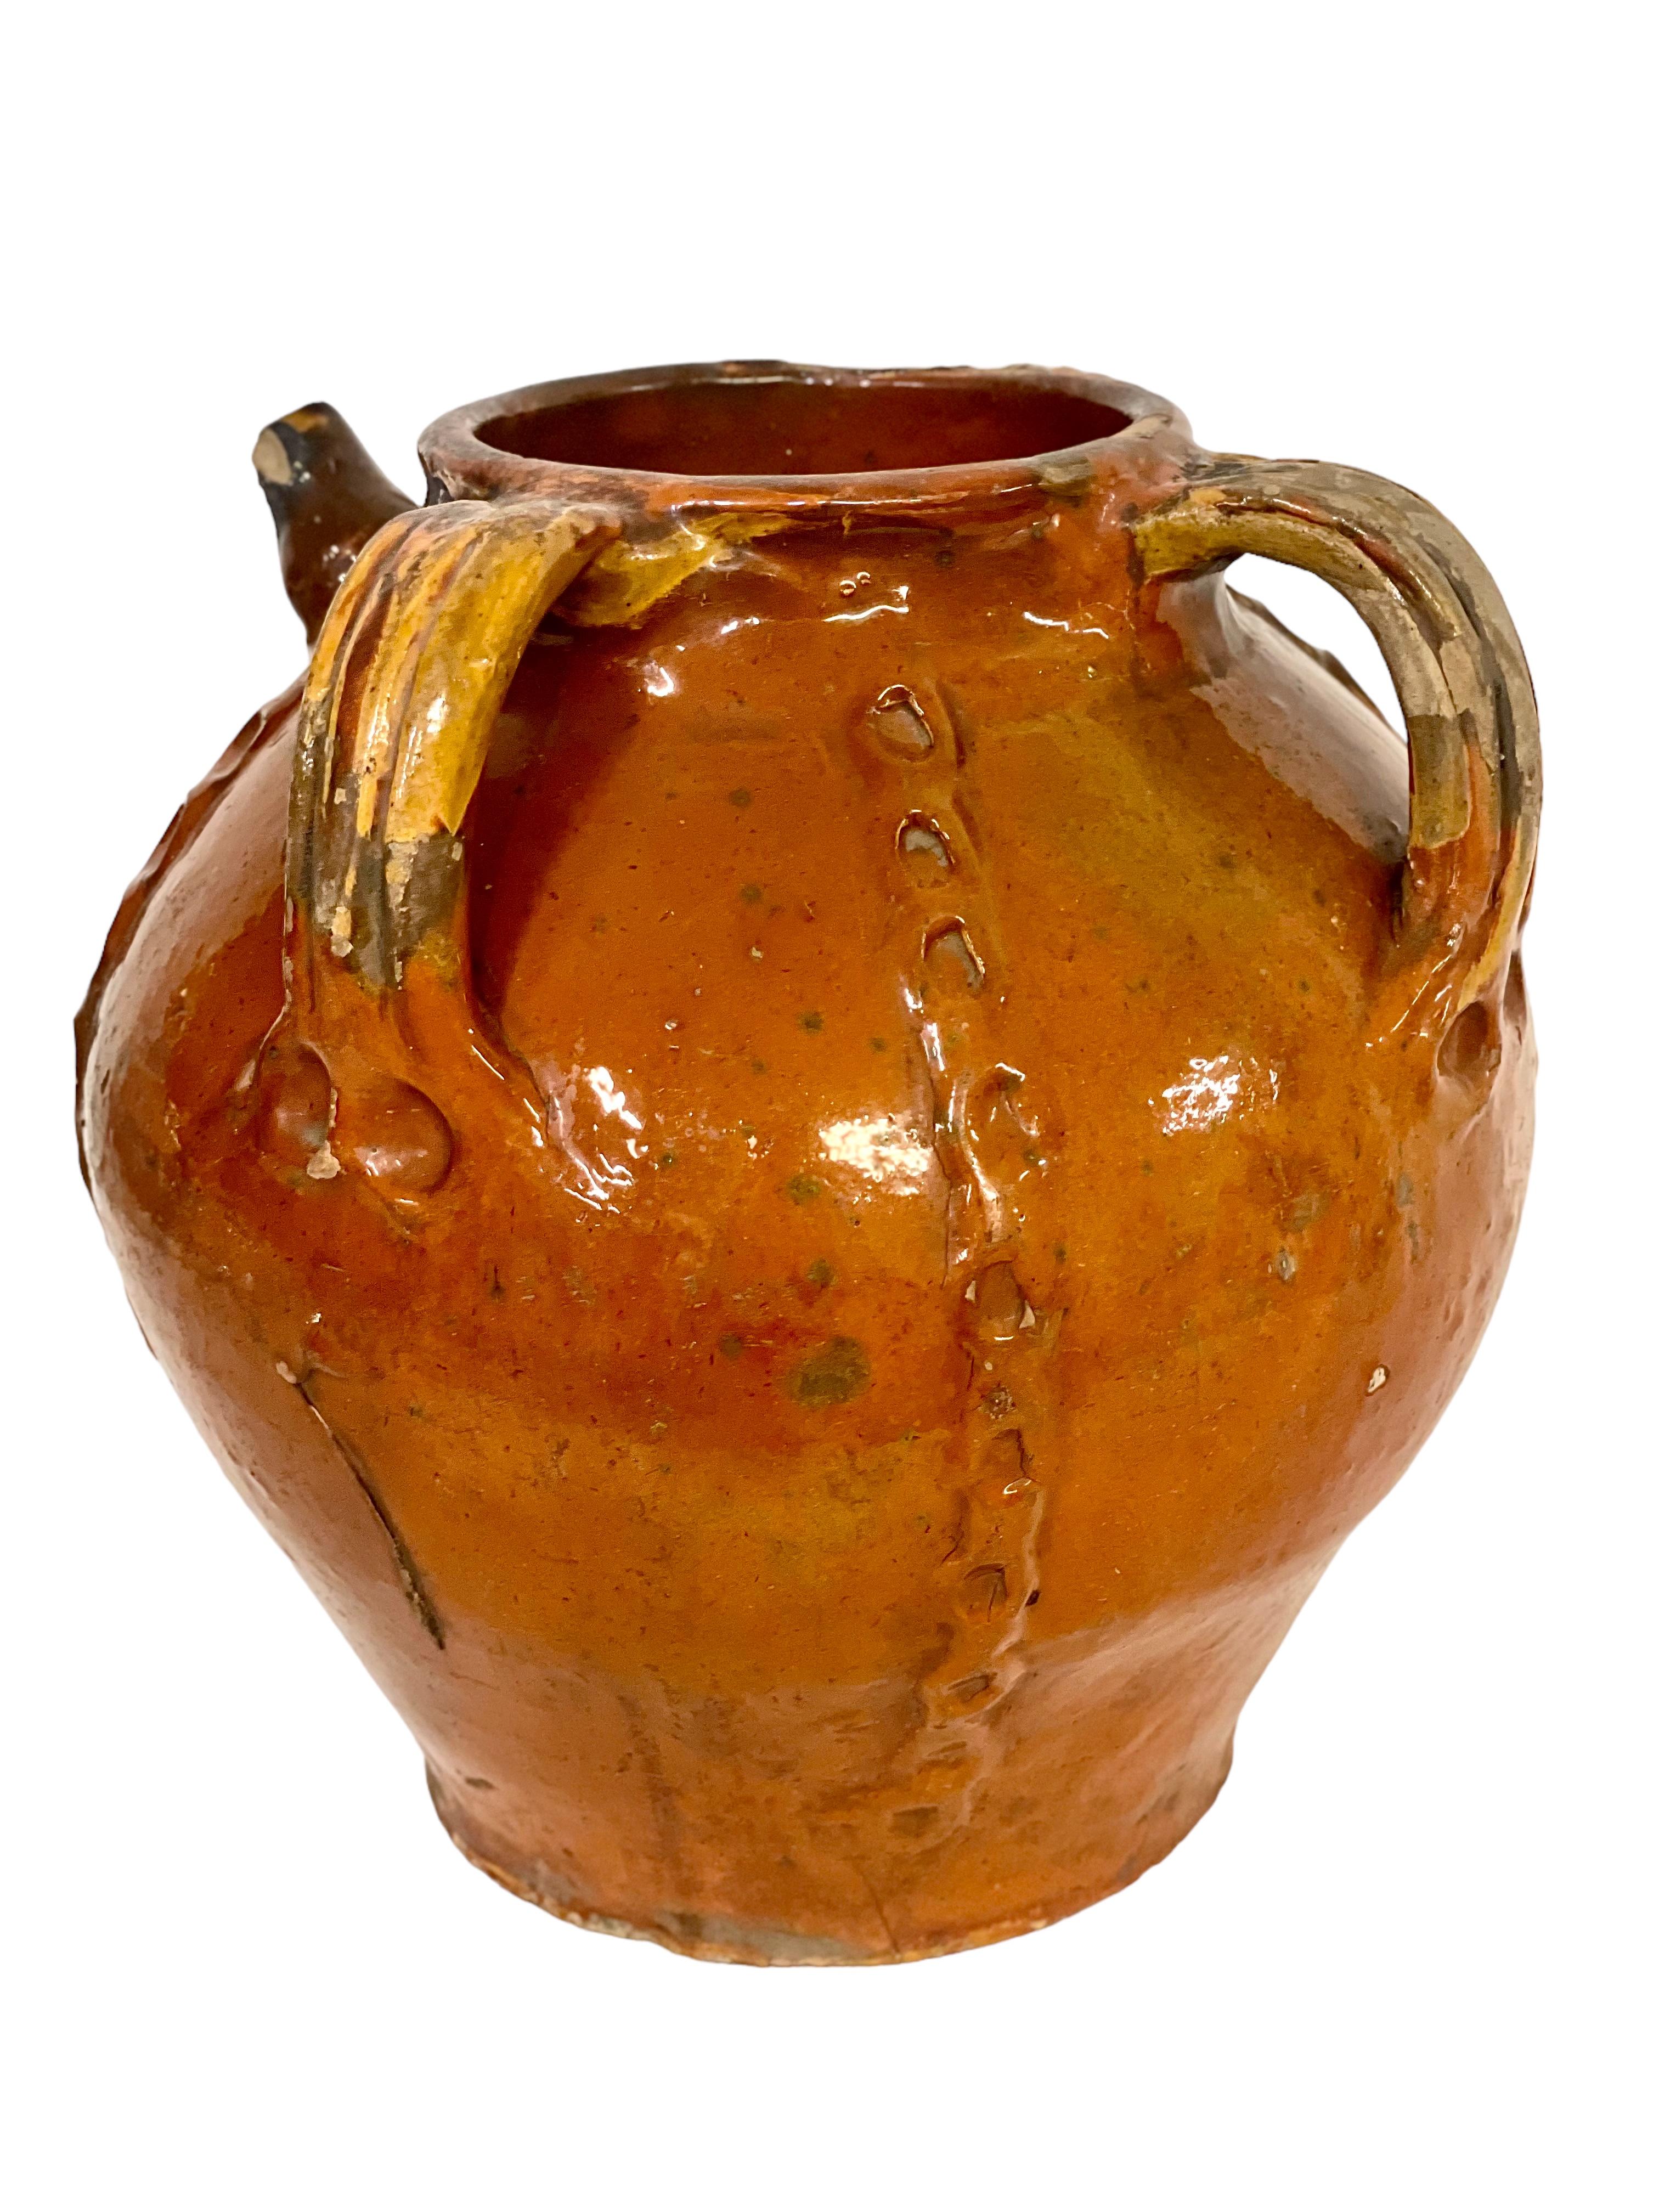 A rustic and very attractive antique French walnut oil jug, with three handles and a shaped pouring spout. Glazed all over in a gorgeous glossy caramel-coloured glaze, this gently rounded vessel has been further embellished with four applied and